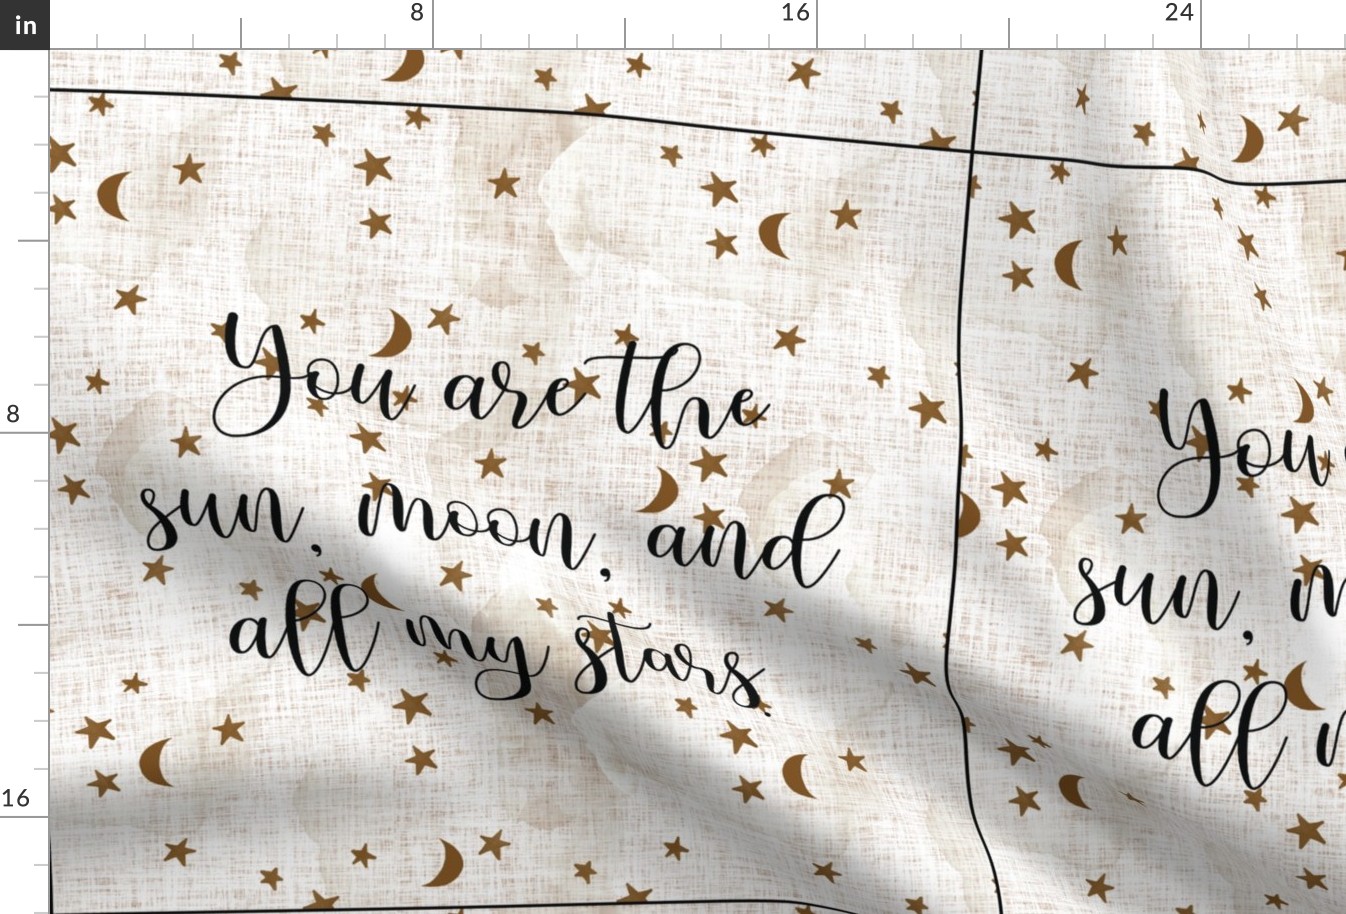 6 loveys: sugar sand linen // you are the sun, moon, and all my stars